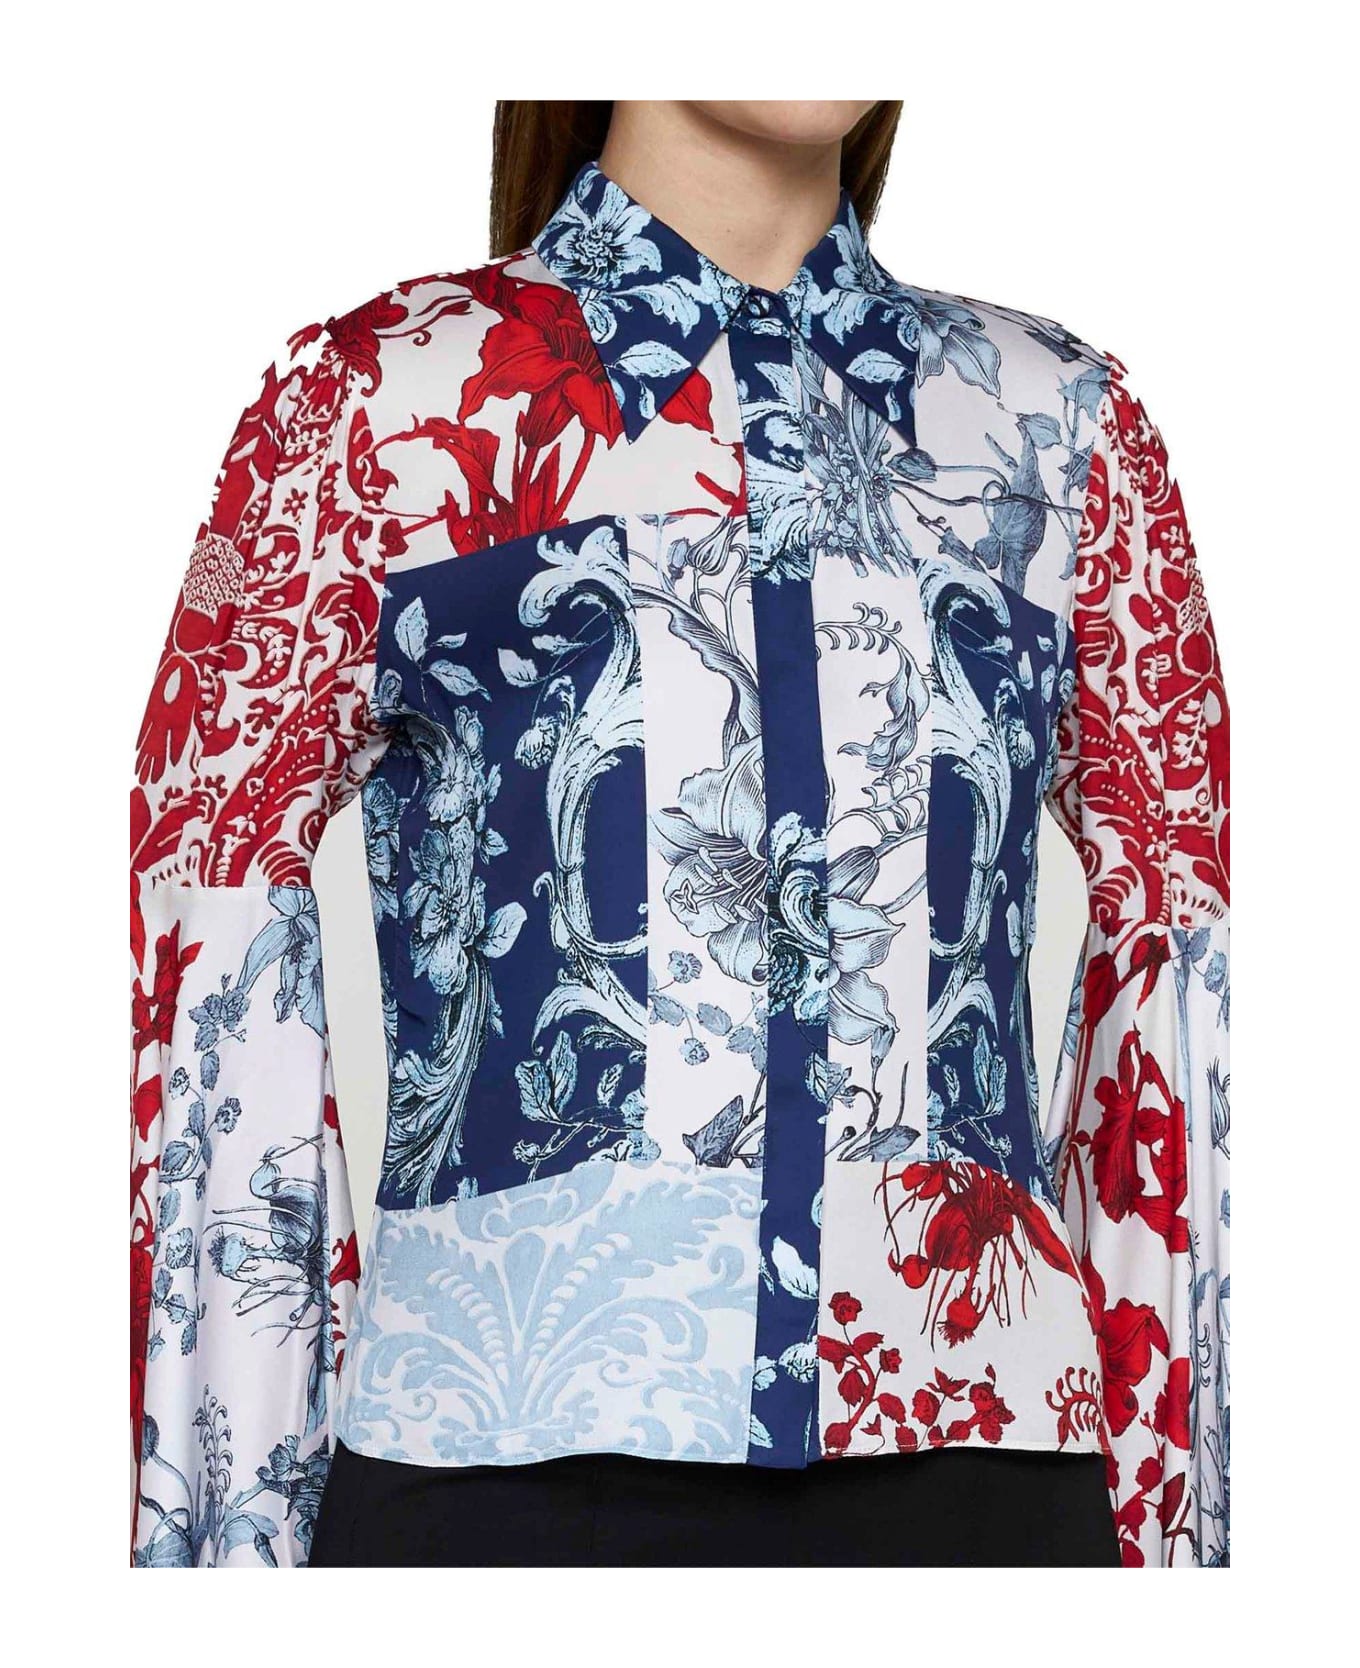 Alice + Olivia Willa Floral-printed Bell-sleeved Blouse - Blue